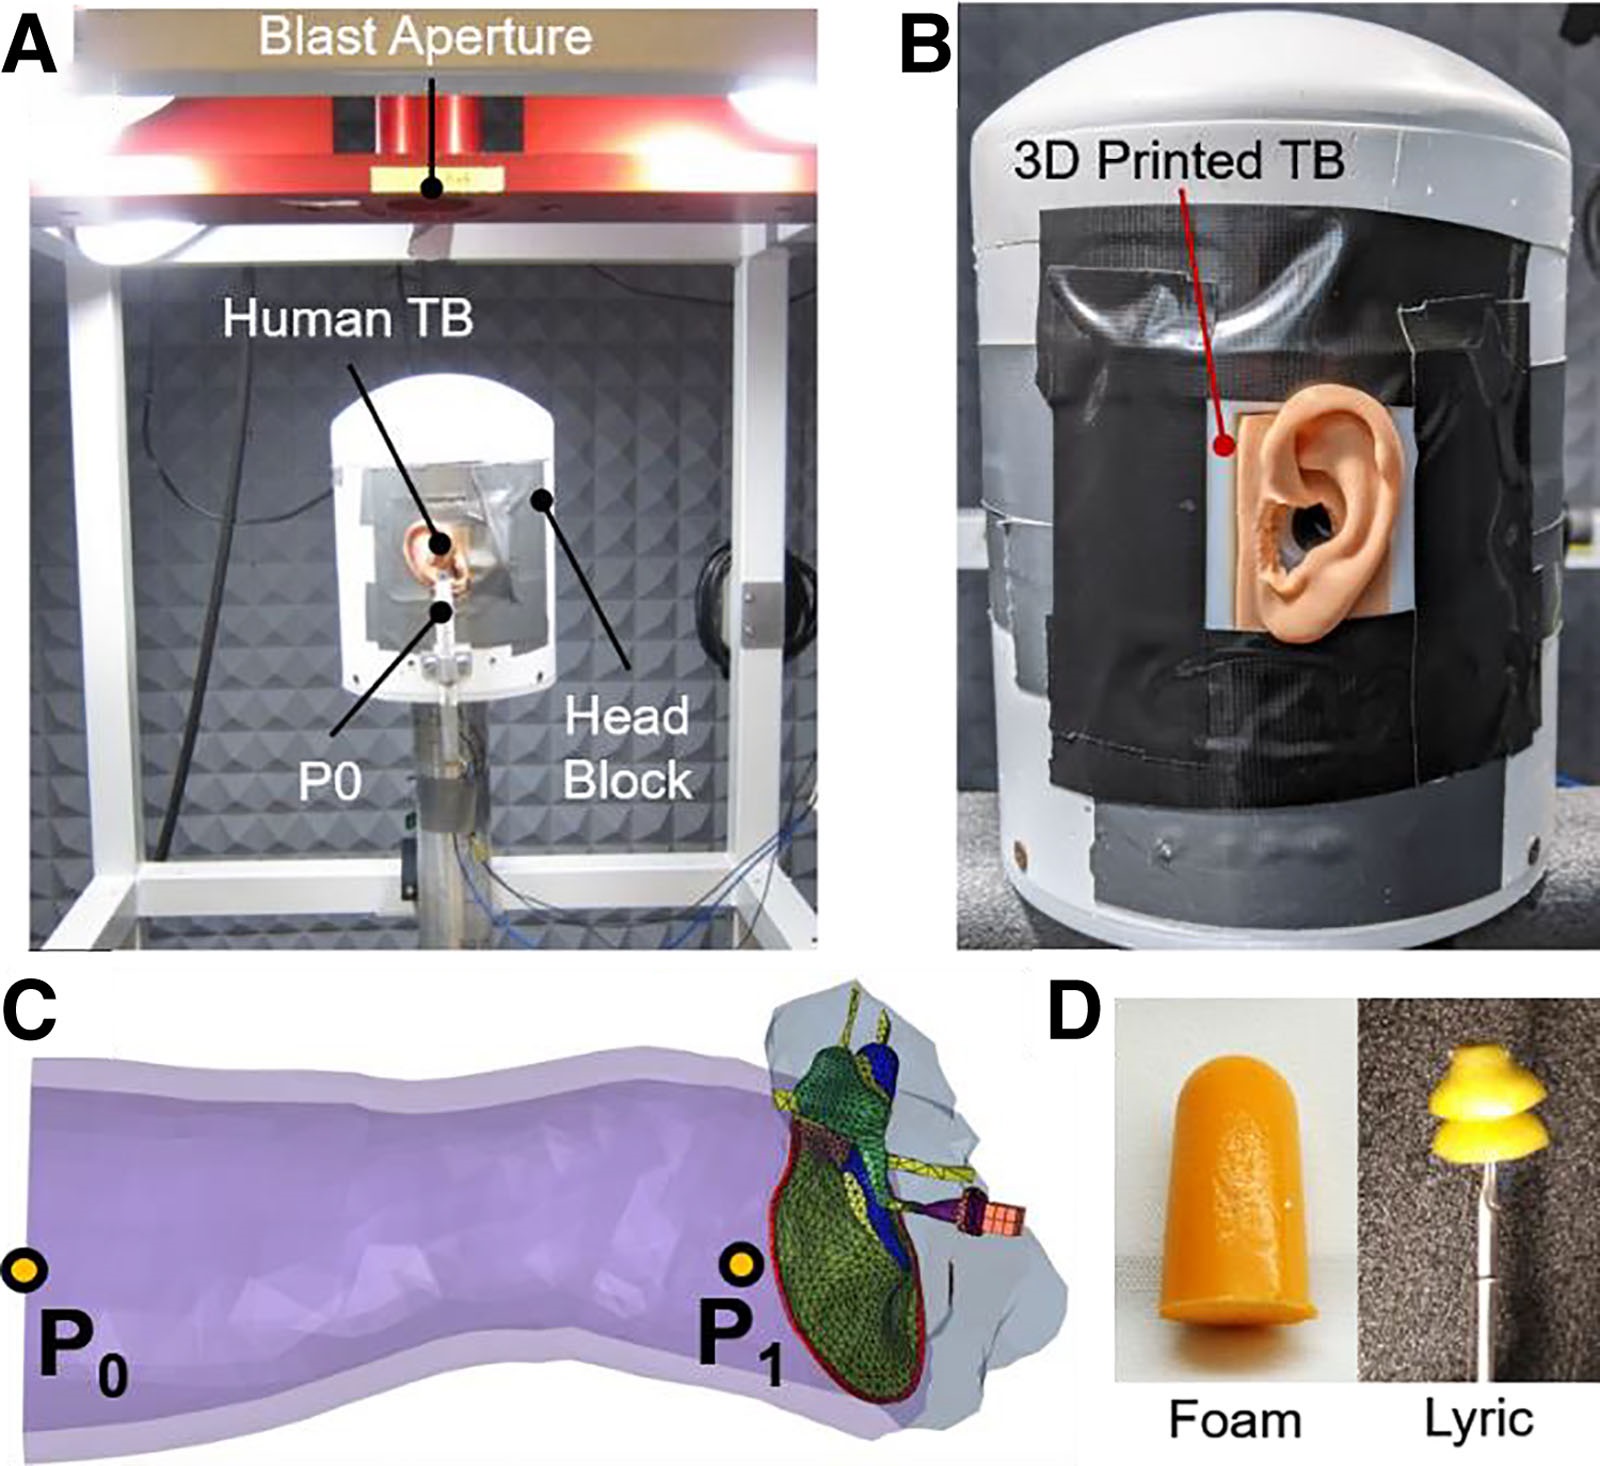 Experimental blast setup and pressure sensor placements used to measure blast wave transmission in the 3D printed ear models. Image via Otology & Neurotology Open.